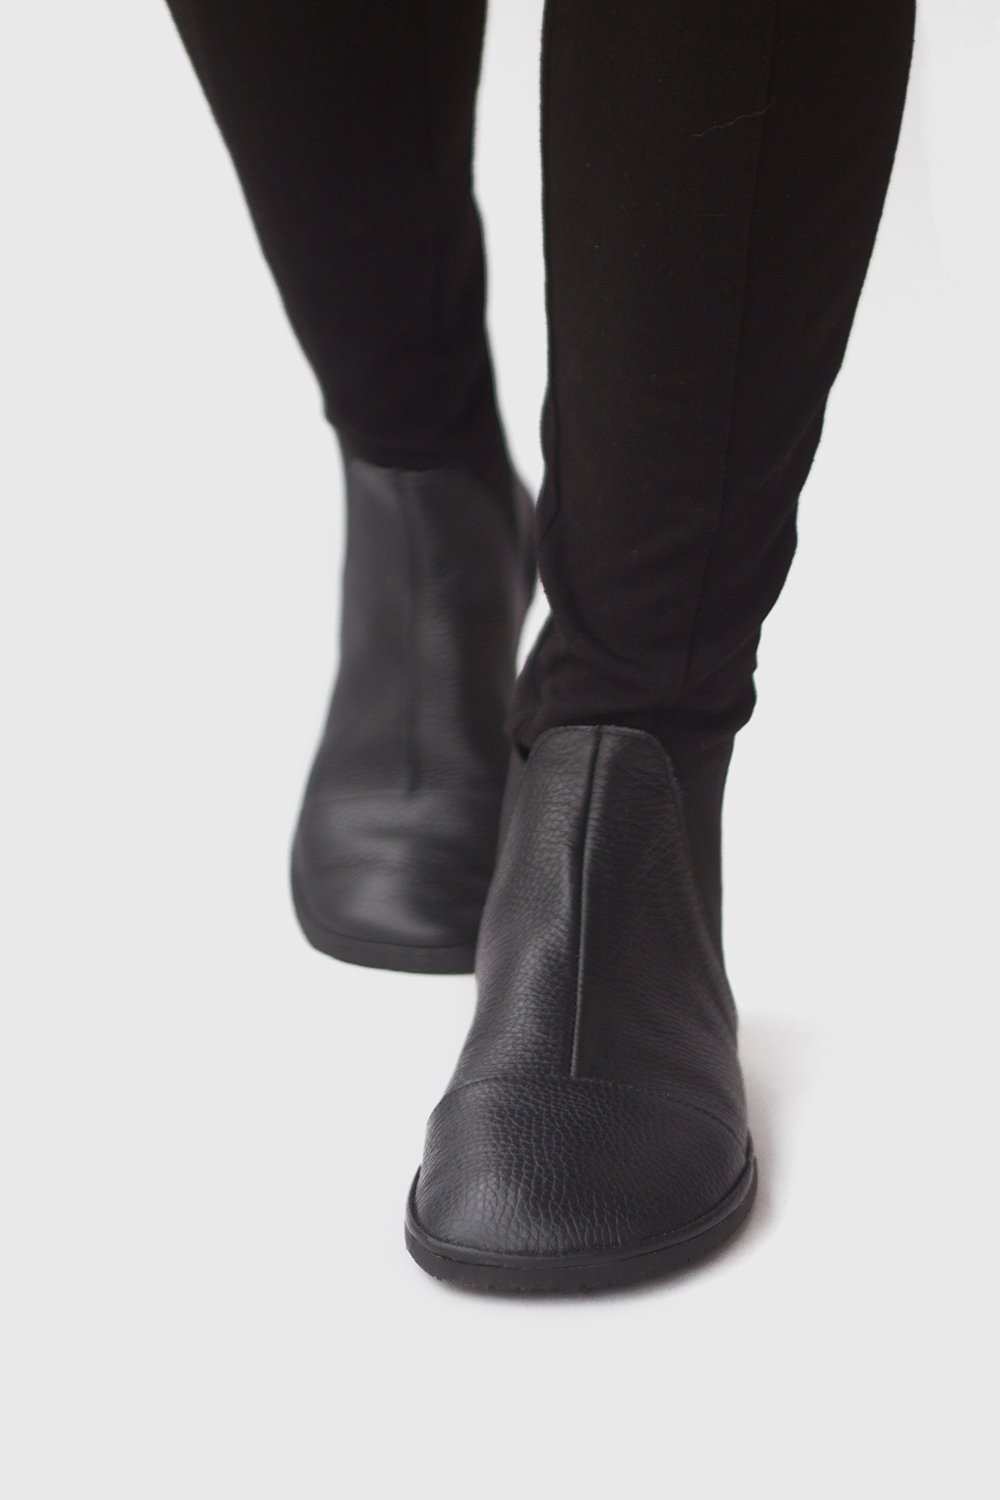 Chelsea boots in Pebbled Black | The Drifter Leather handmade shoes